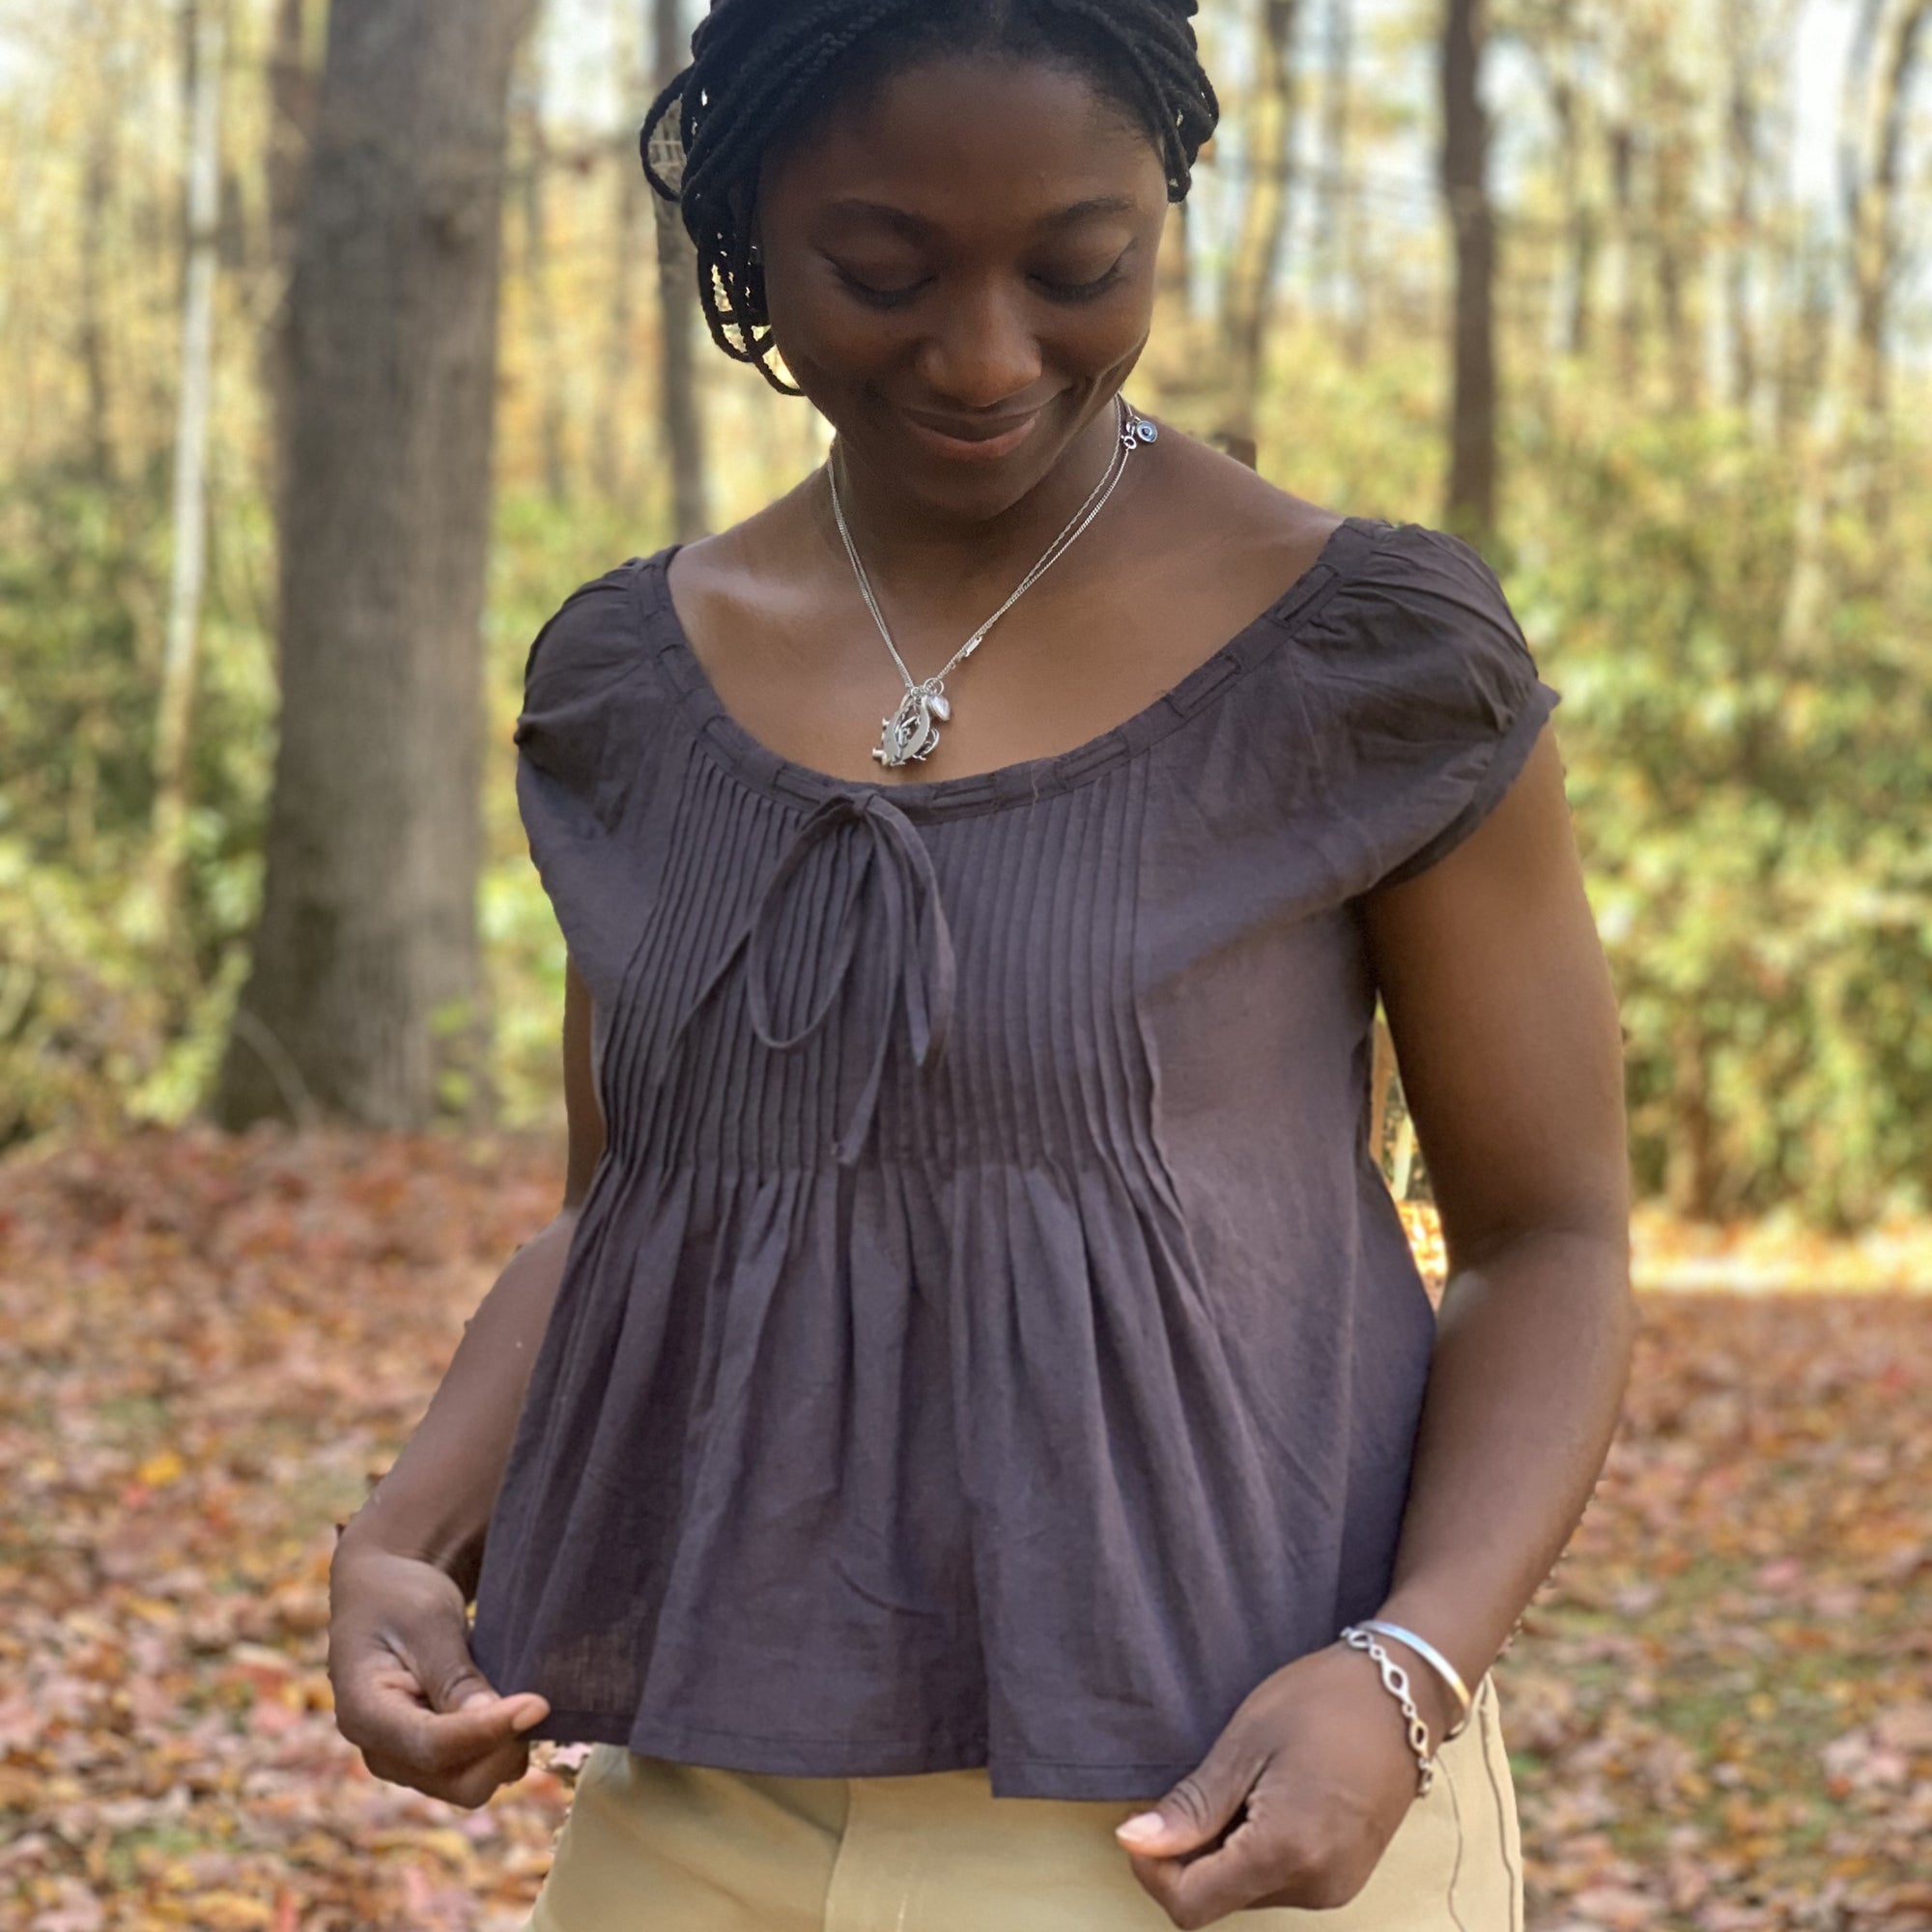 African American woman wearing 223 Chemise Blouse looking  down at the garment and head turned to her right. The top is made out of a cotton linen chambray in plum. she is outside with the orange, yellow and red leaves of fall on the ground.